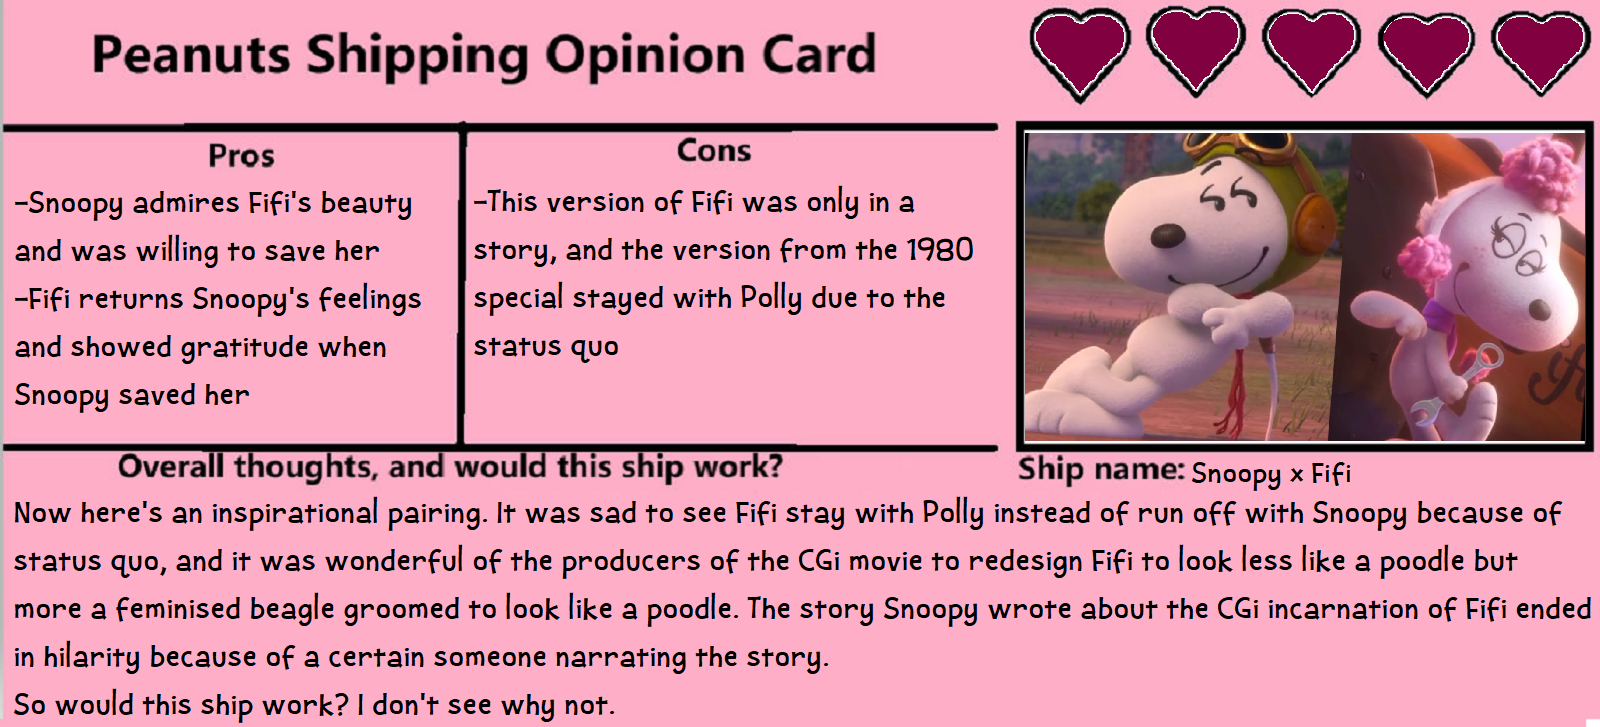 Peanuts Shipping Opinion Card Snoopy X